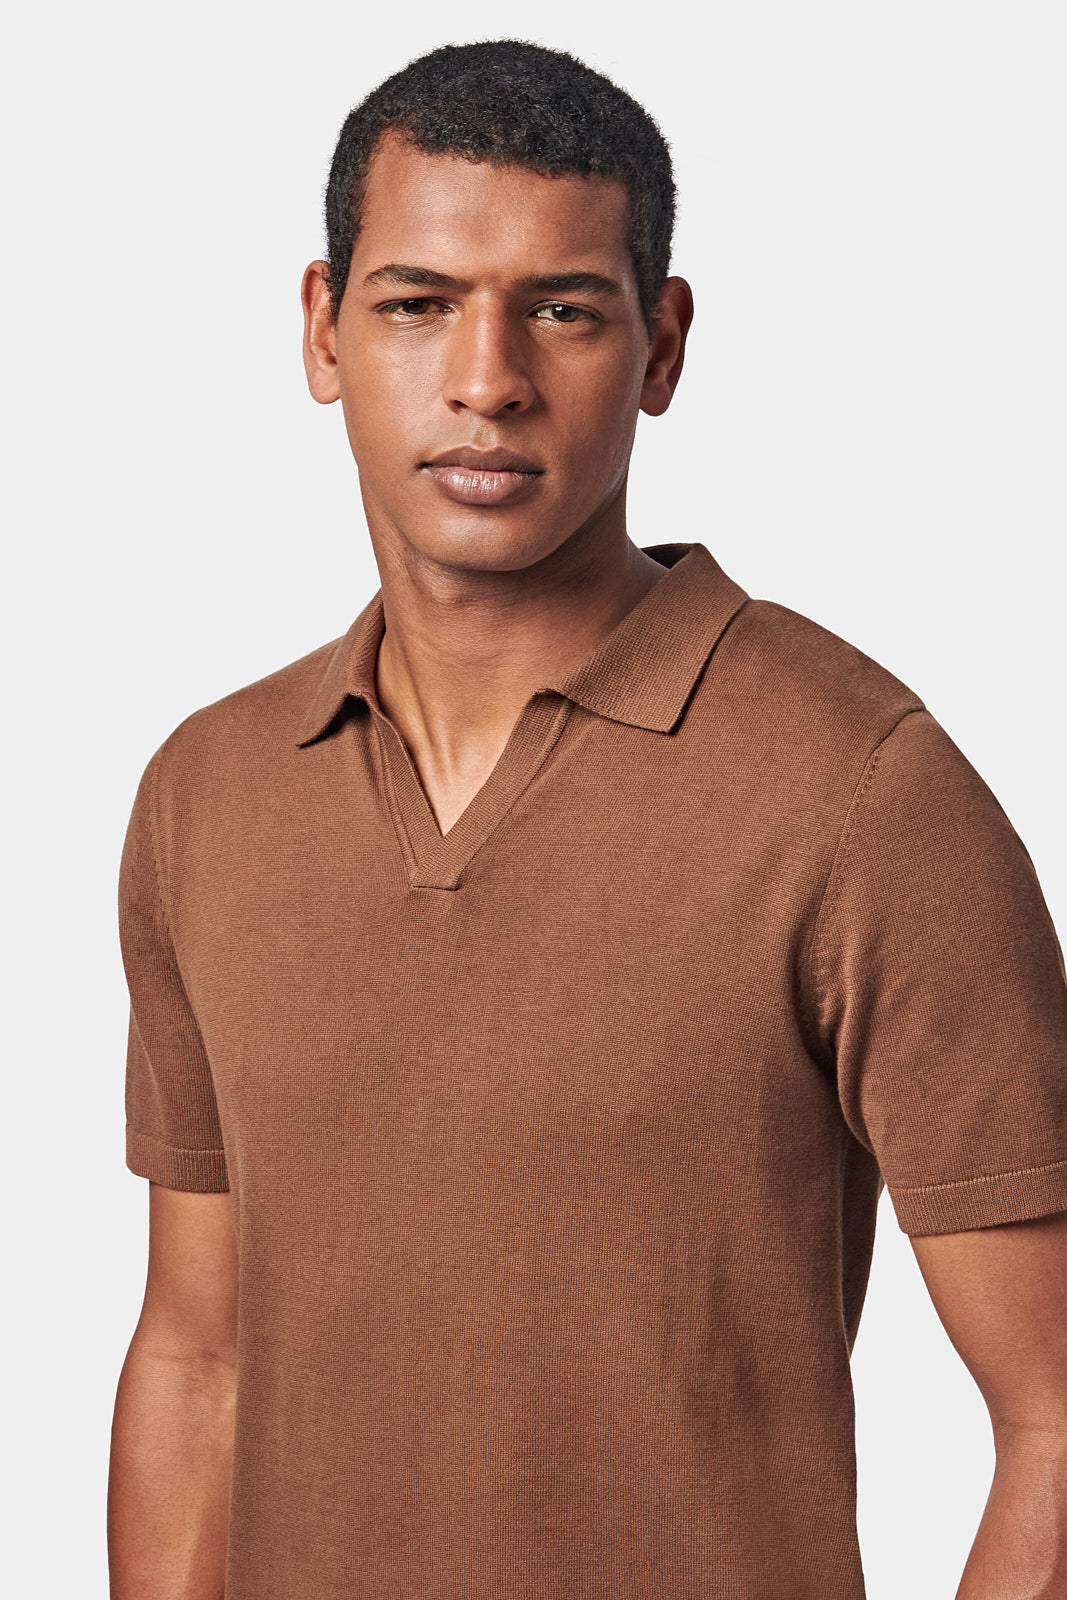 Knitted Short Sleeve V-Neck Polo in Carafe